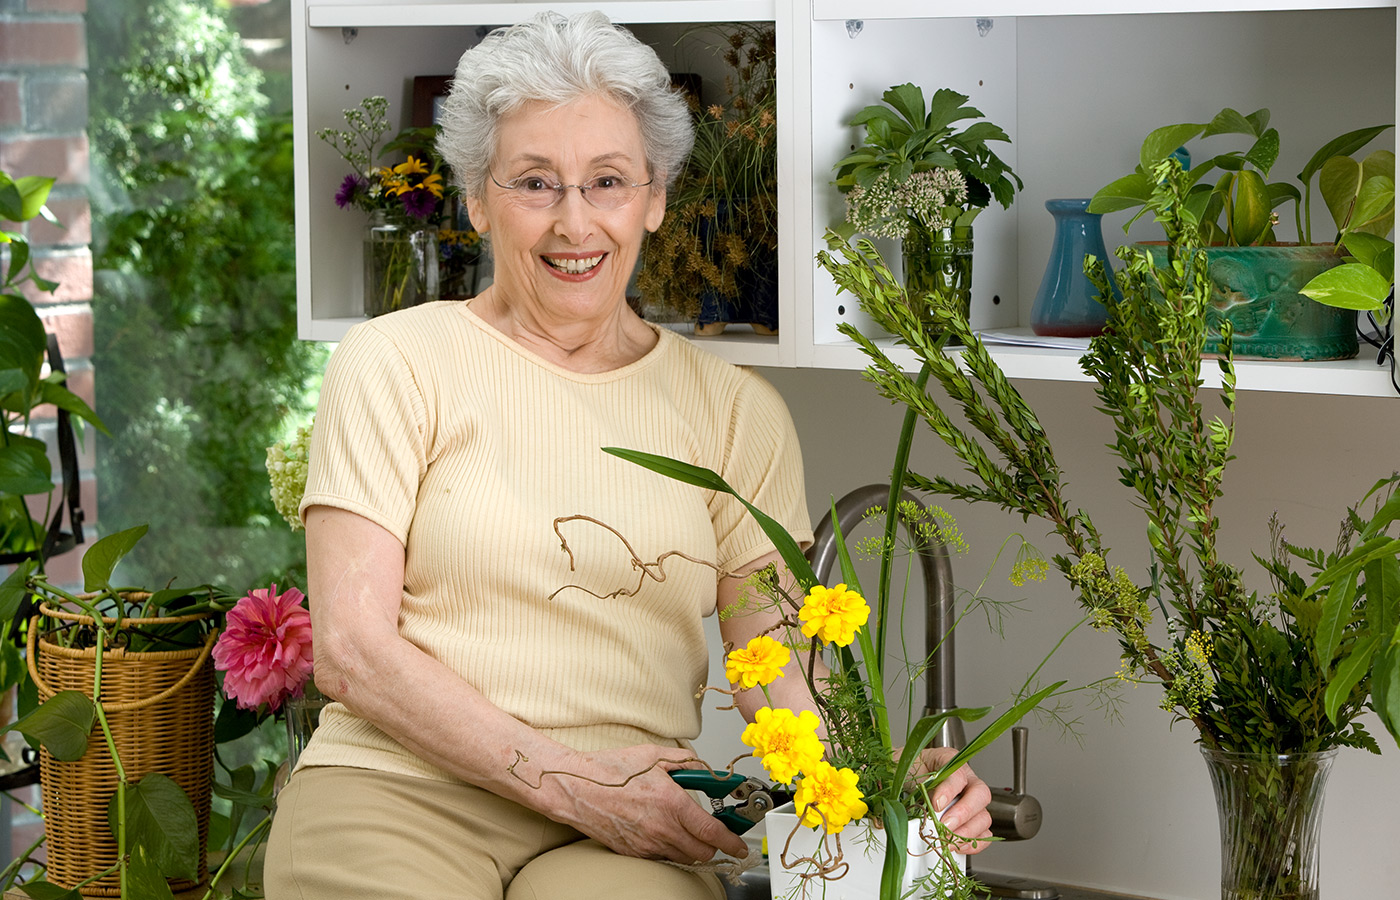 resident smiling and watering a pot of yellow flowers